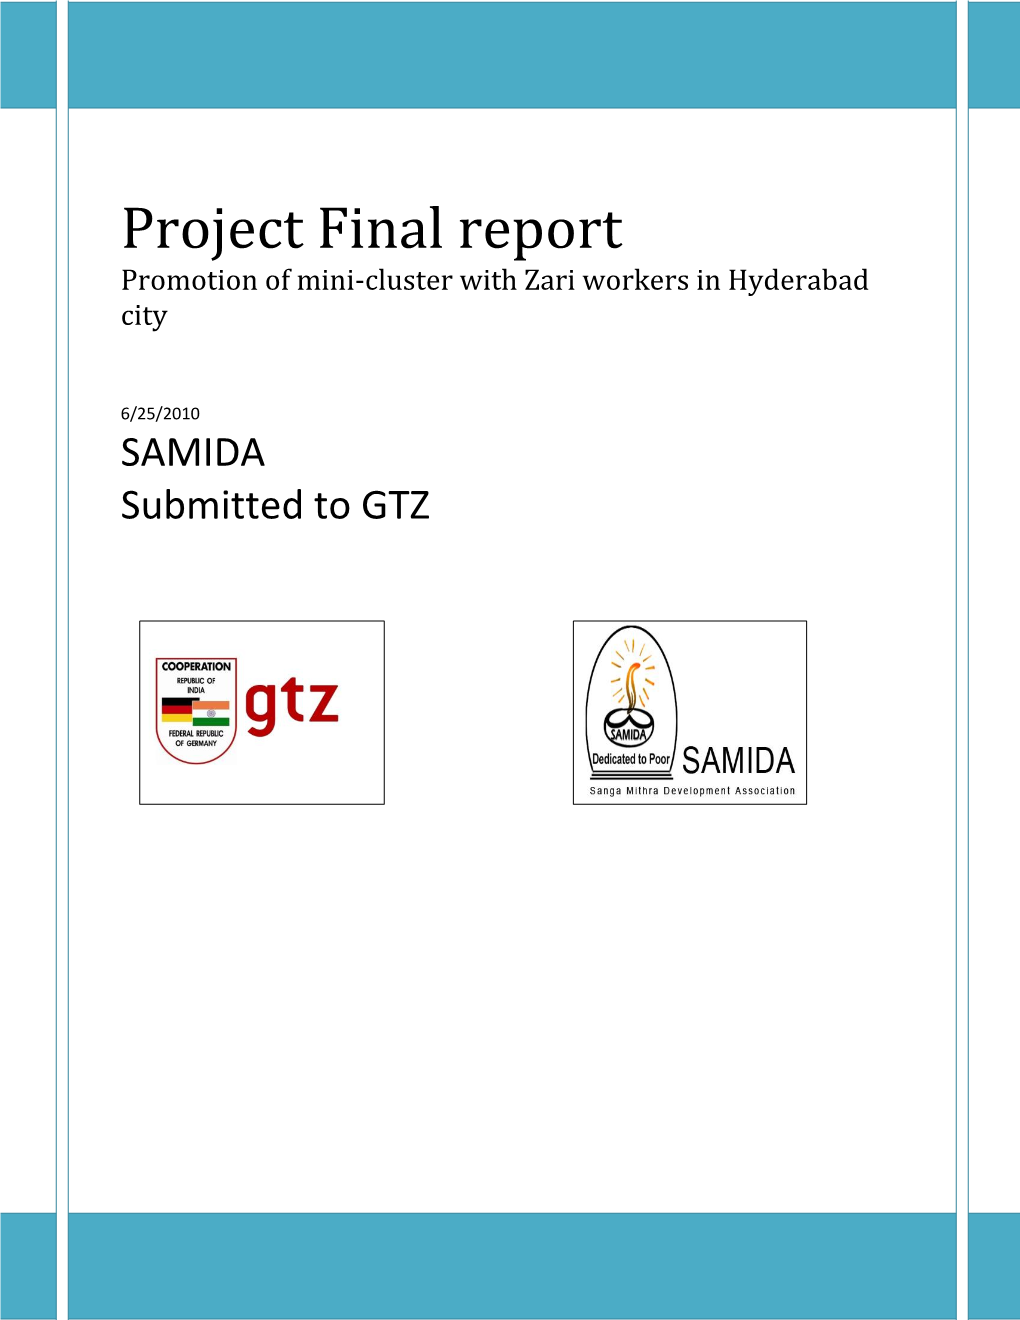 Project Final Report Promotion of Mini-Cluster with Zari Workers in Hyderabad City